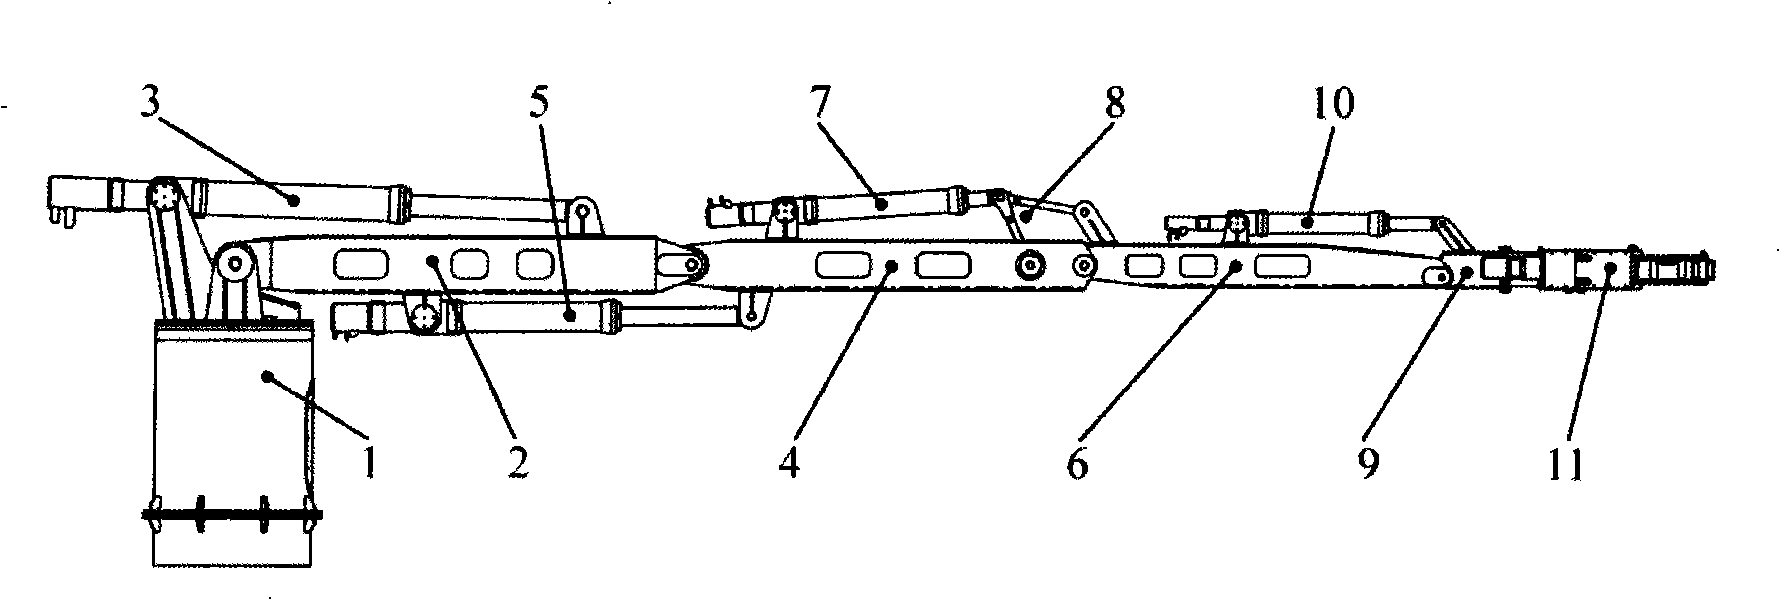 Large-sized redundant mechanical arm for handling explosive and rescue